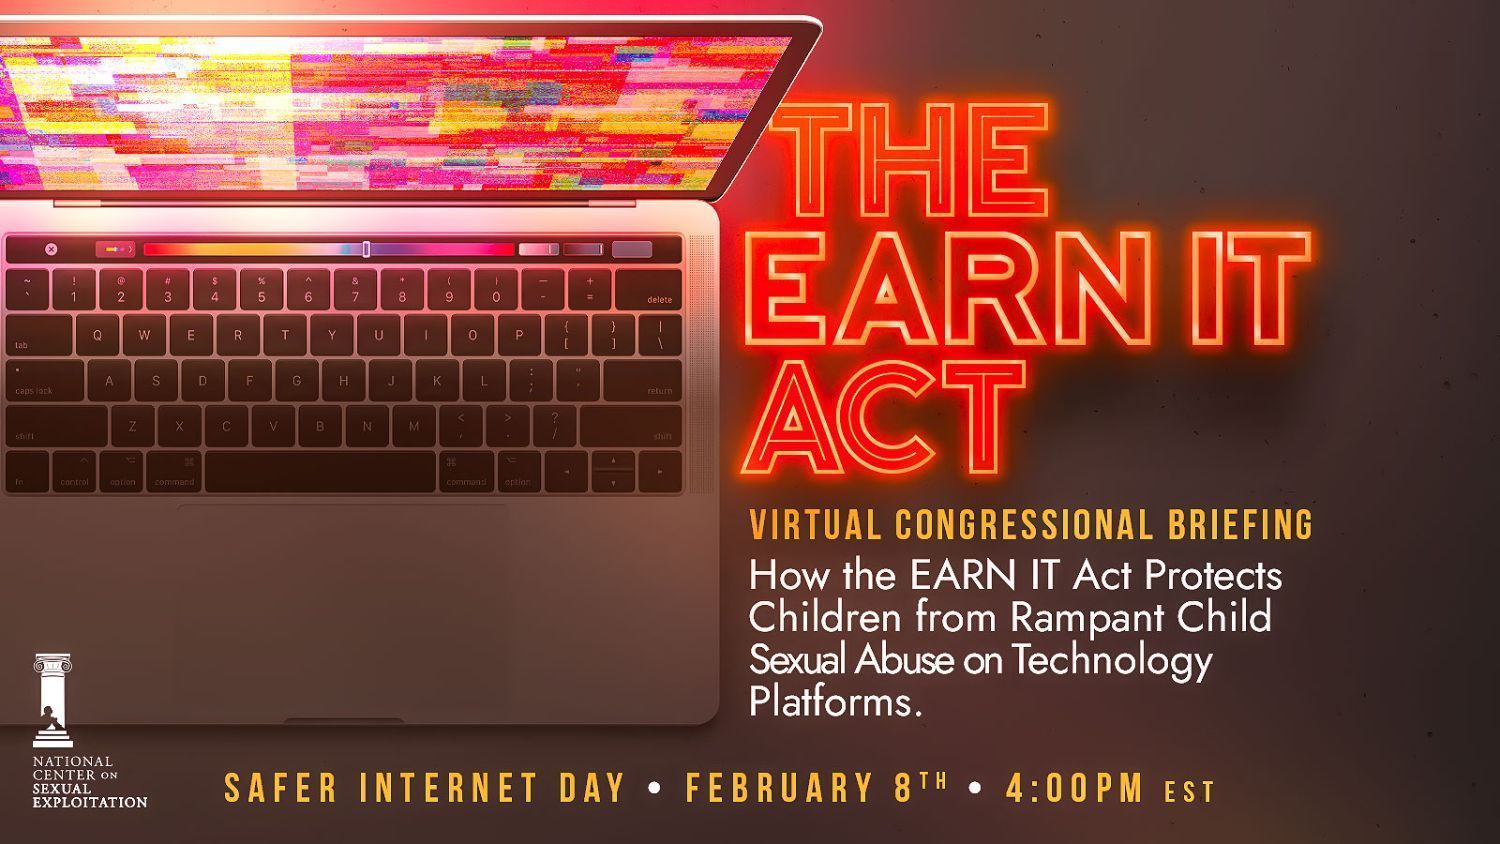 Virtual Congressional Briefing: How the EARN IT Act Protects Children